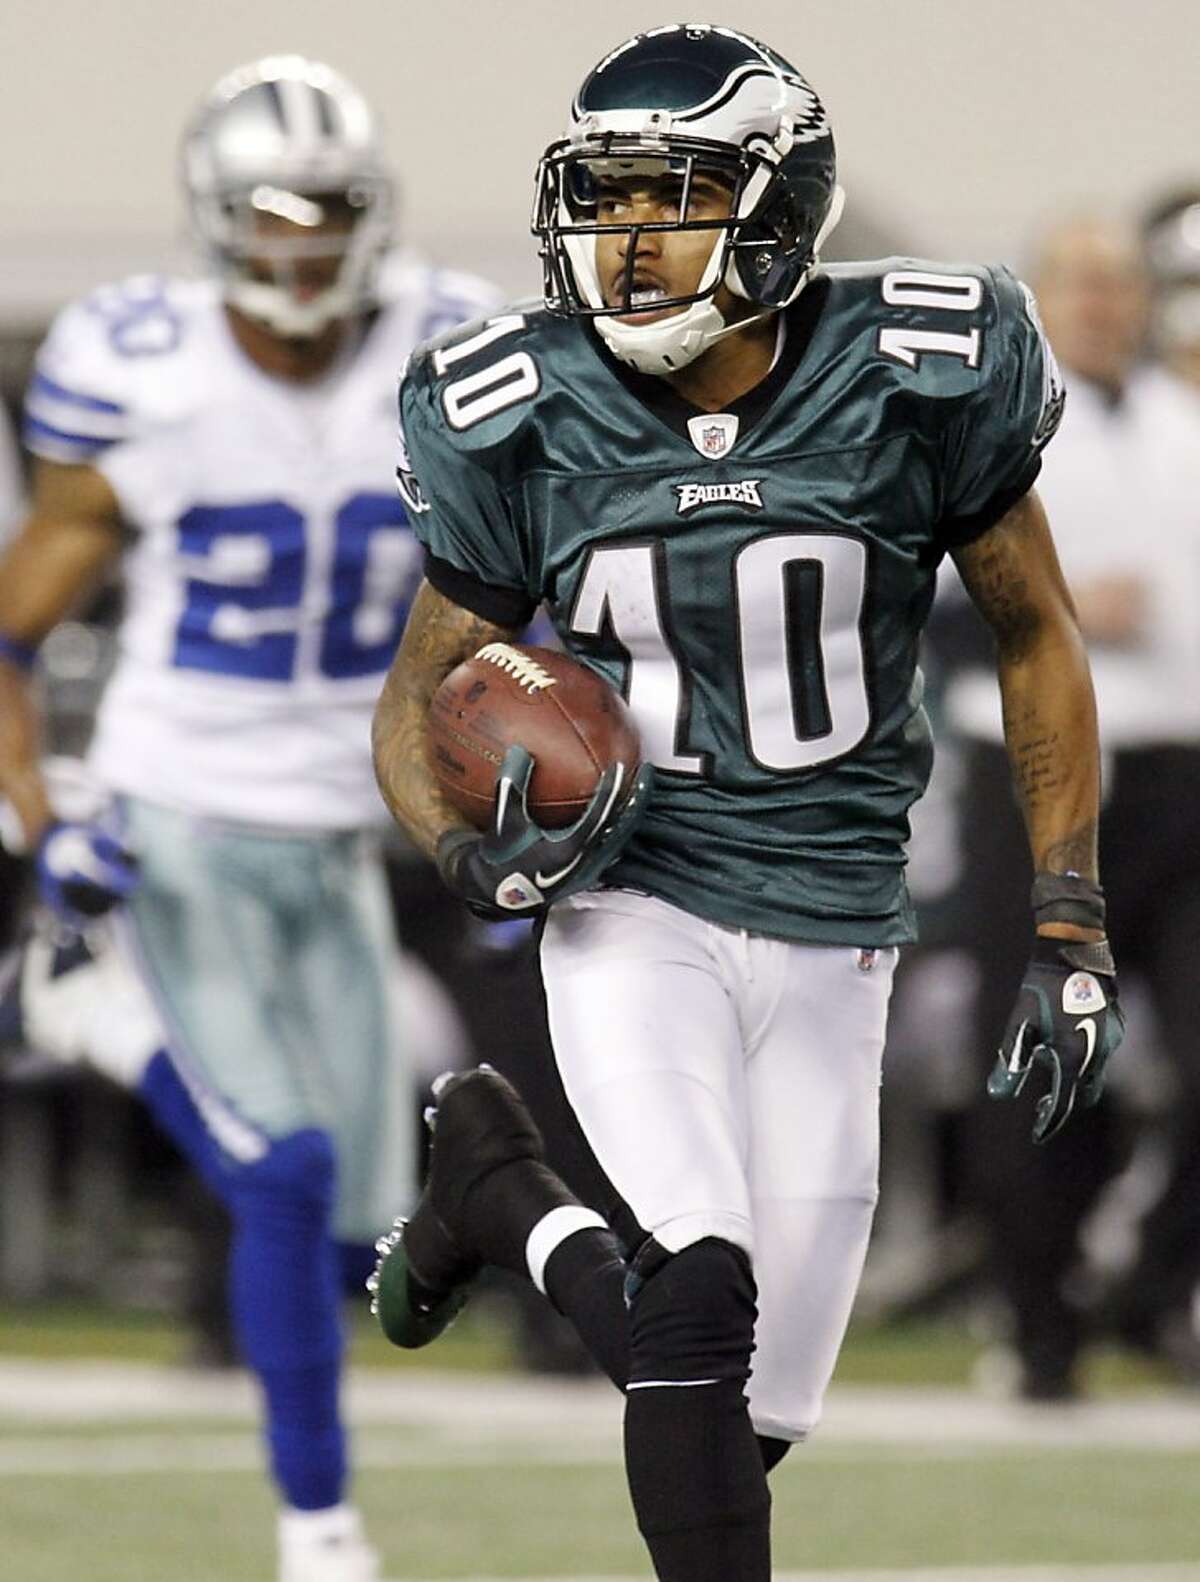 After catching the ball, Philadelphia Eagles wide receiver DeSean Jackson runs for a 91-yard touchdown against the Dallas Cowboys during the second half of an NFL football game, Sunday, Dec. 12, 2010, in Arlington, Texas.